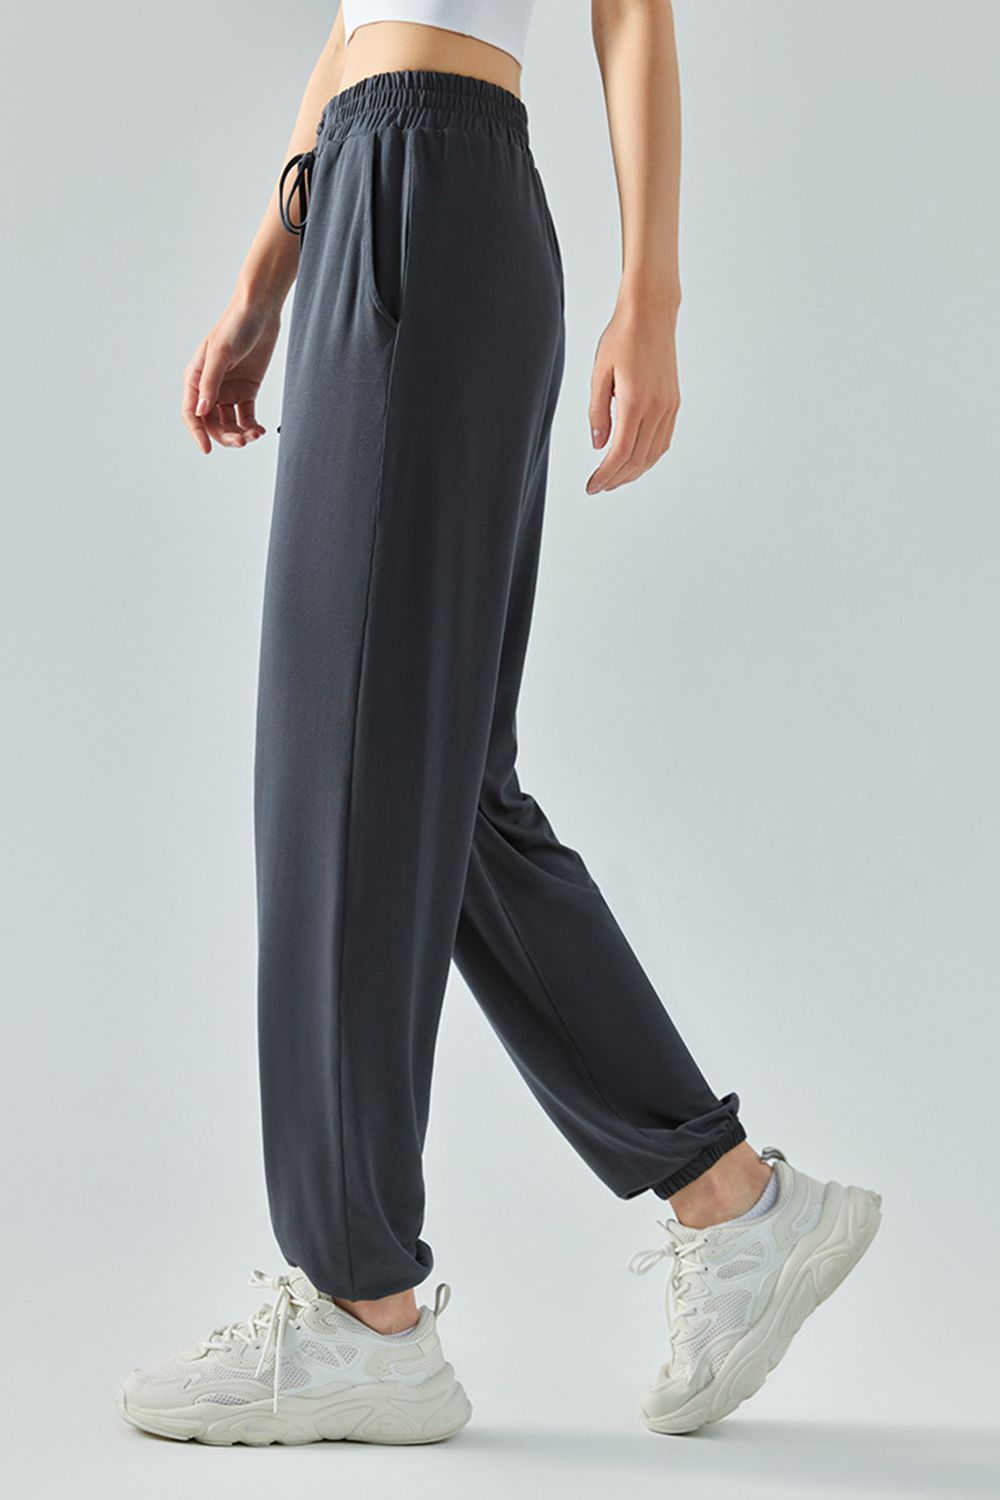 Tie Waist Sports Pants Print on any thing USA/STOD clothes